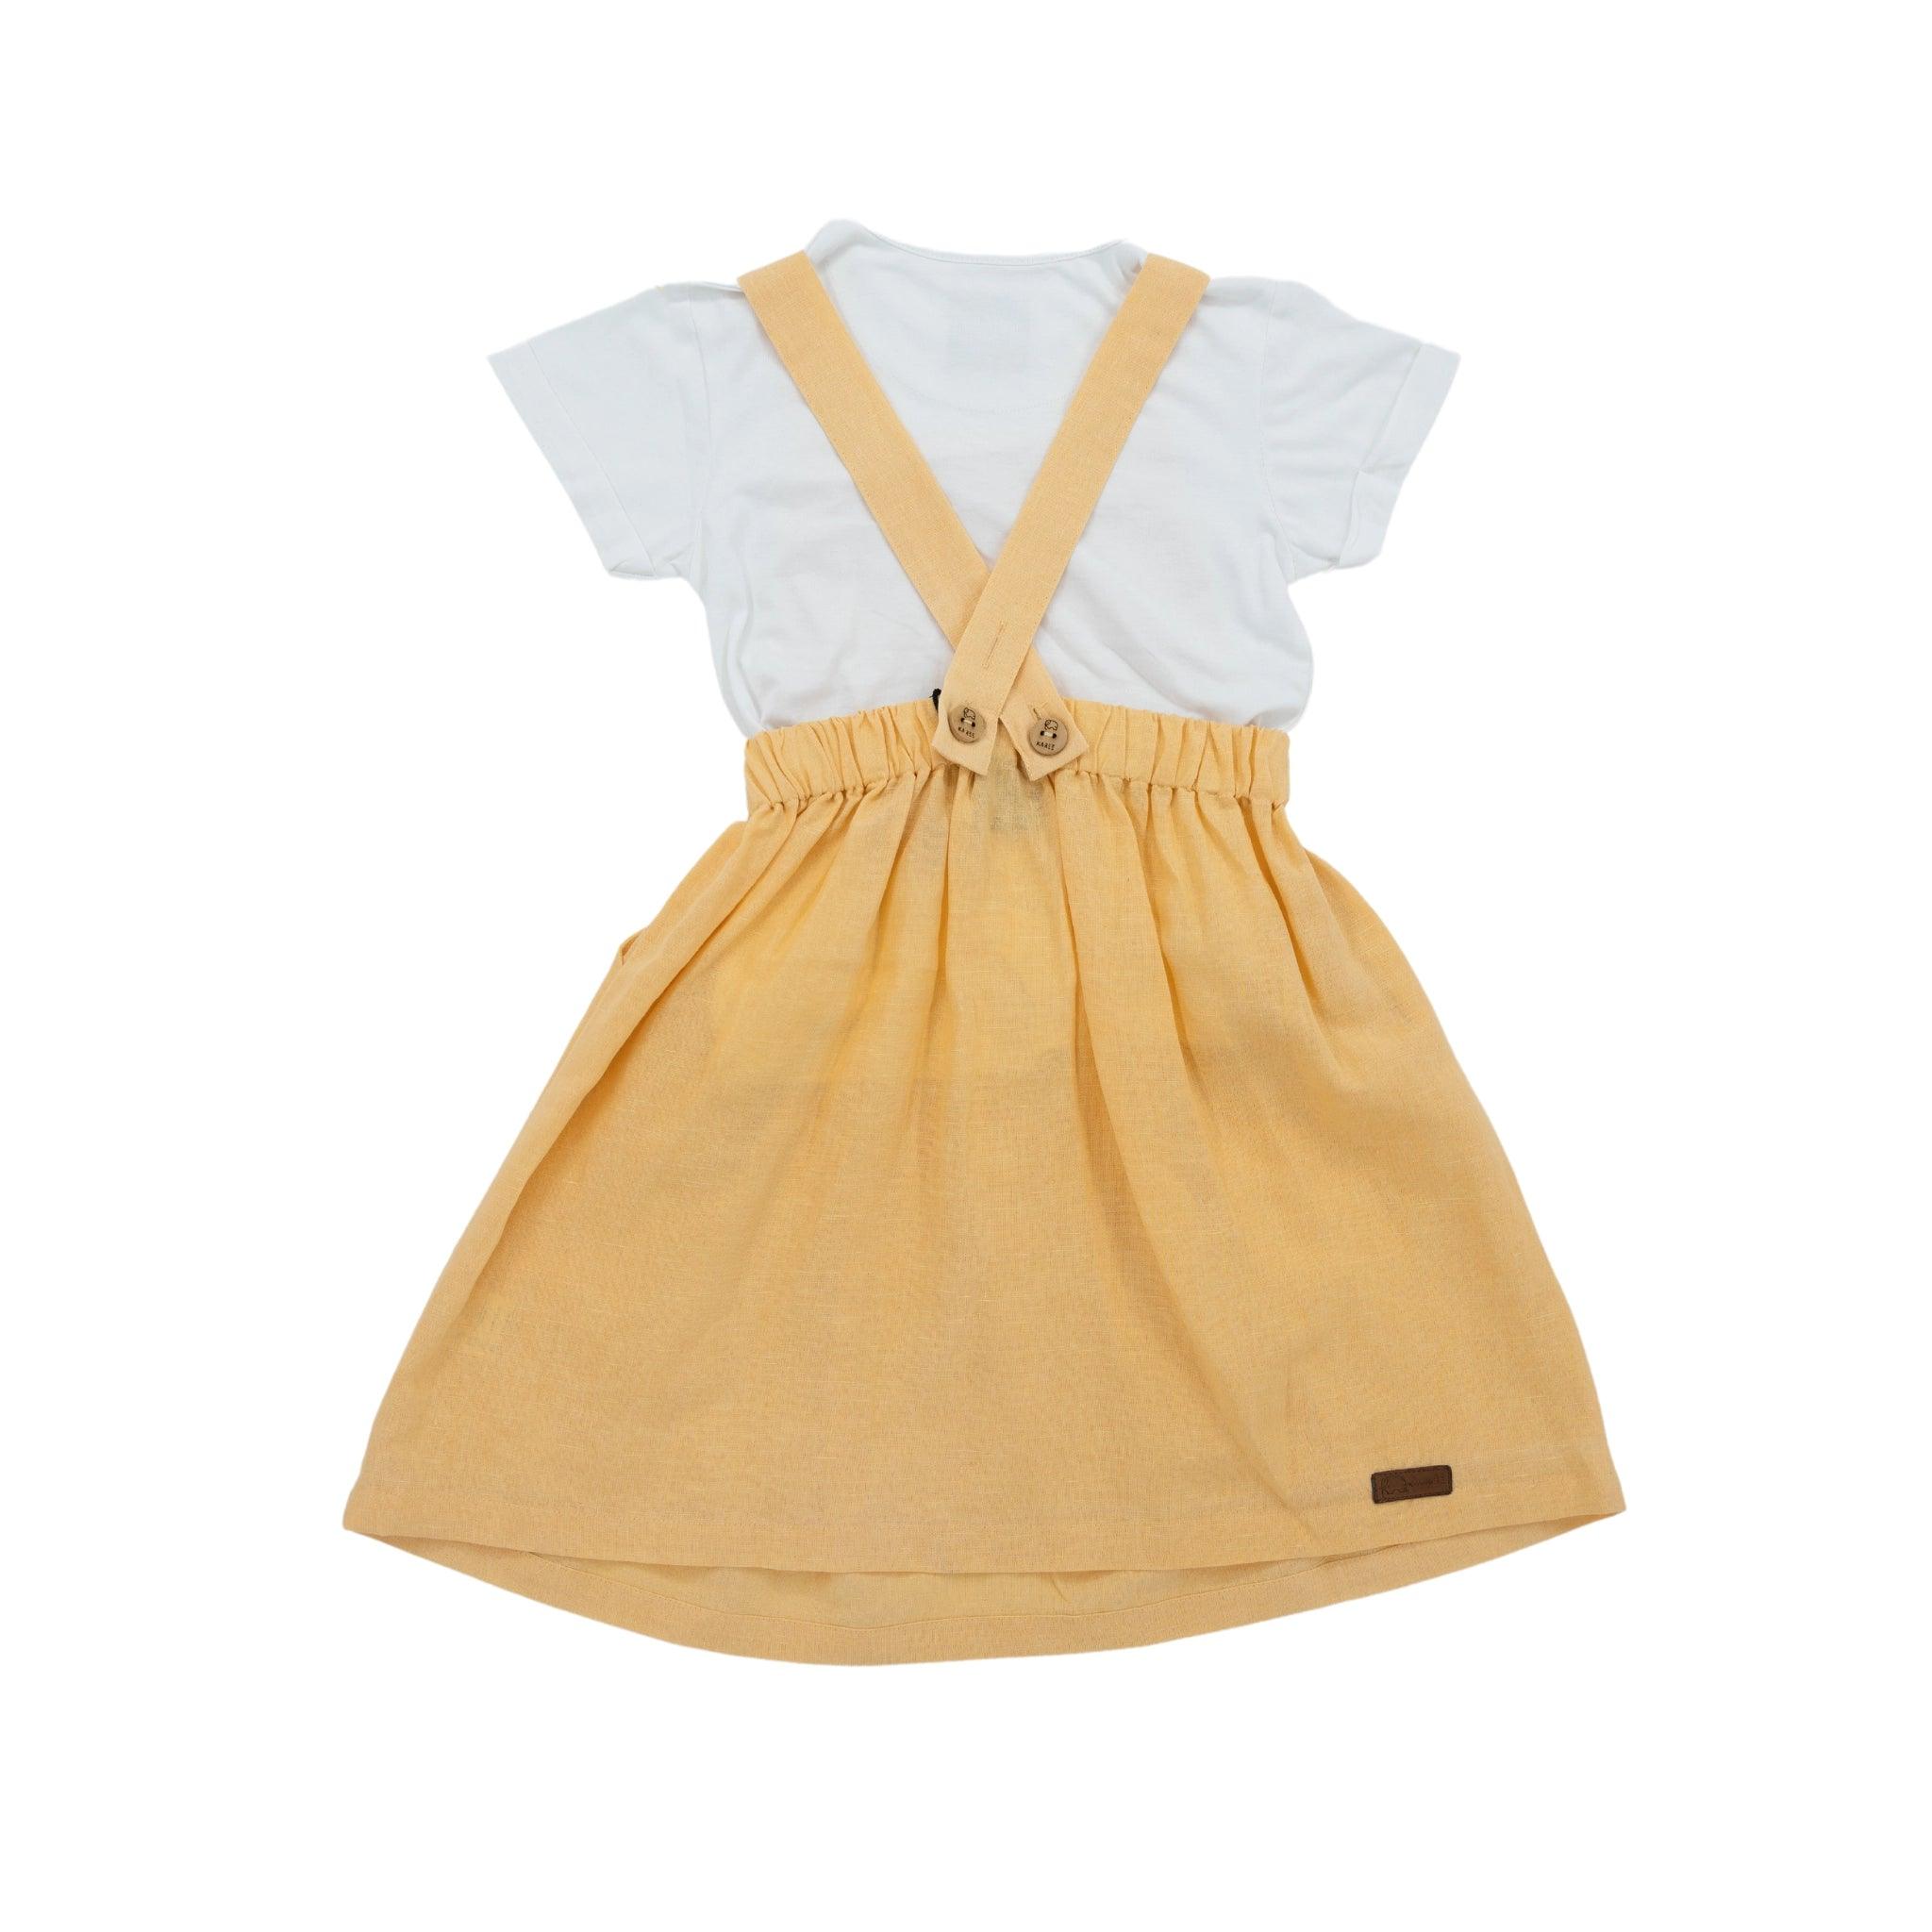 Child's outfit consisting of a white shirt and a Golden Fleece Linen Pinafore suspender skirt made from sustainable linen cotton, on a white background by Karee.